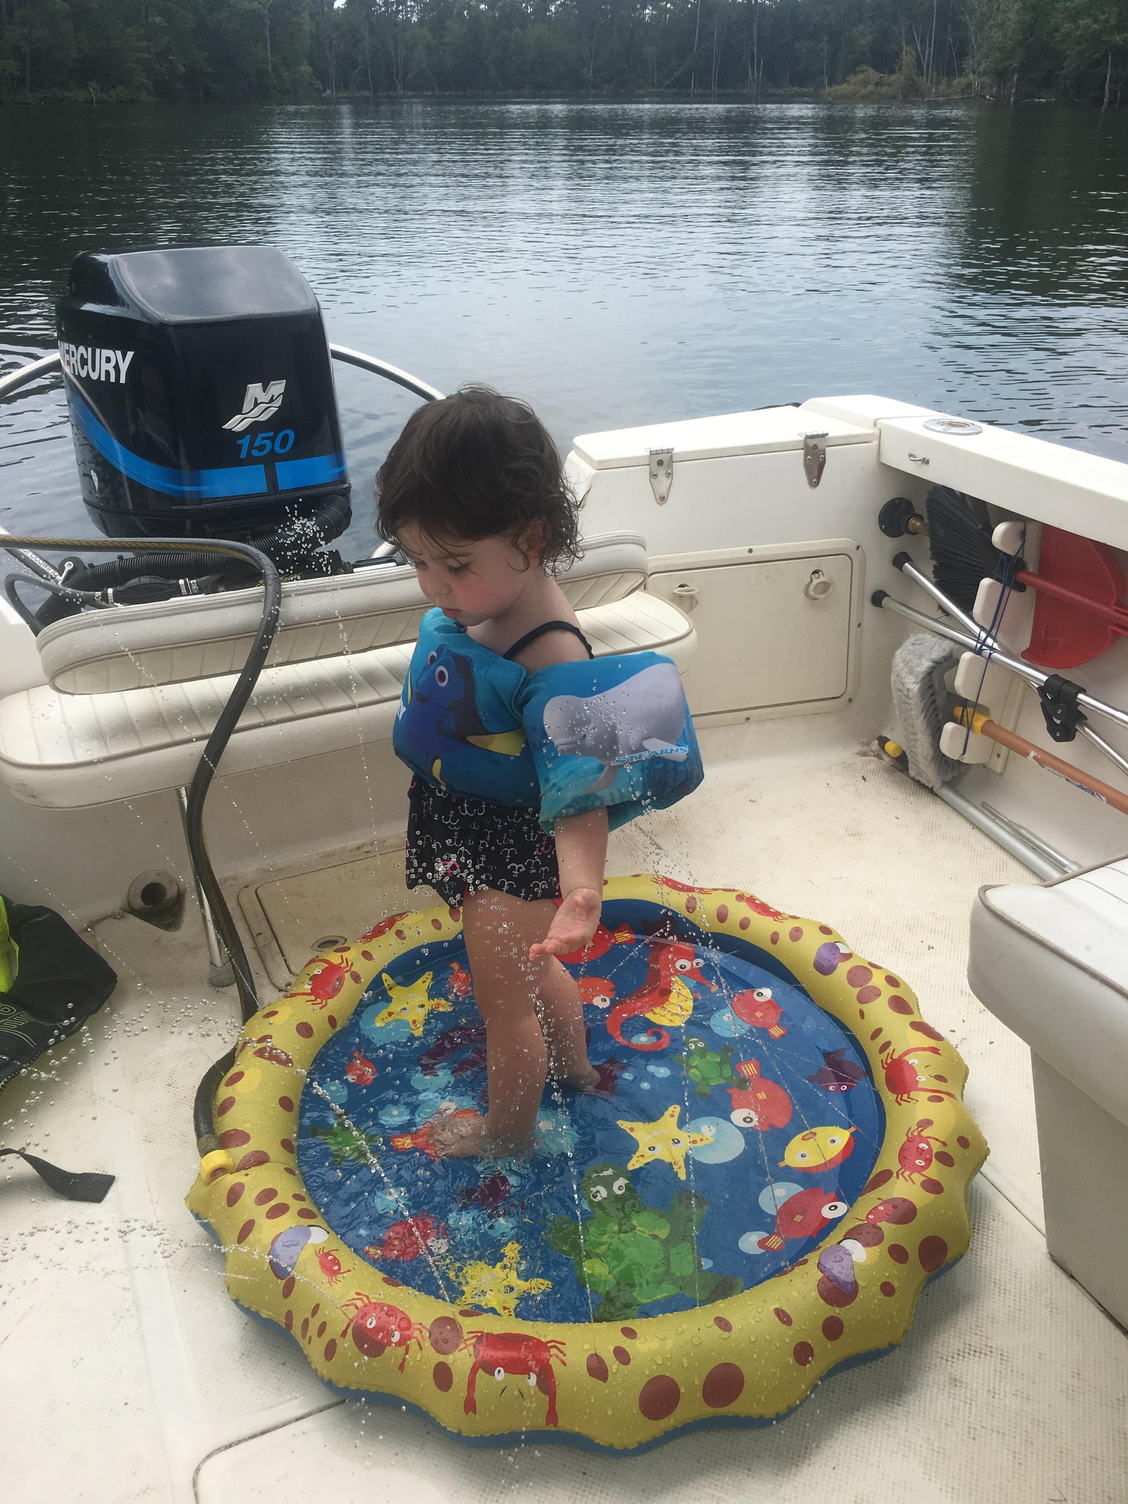 Boating with Babies? - The Hull Truth - Boating and Fishing Forum